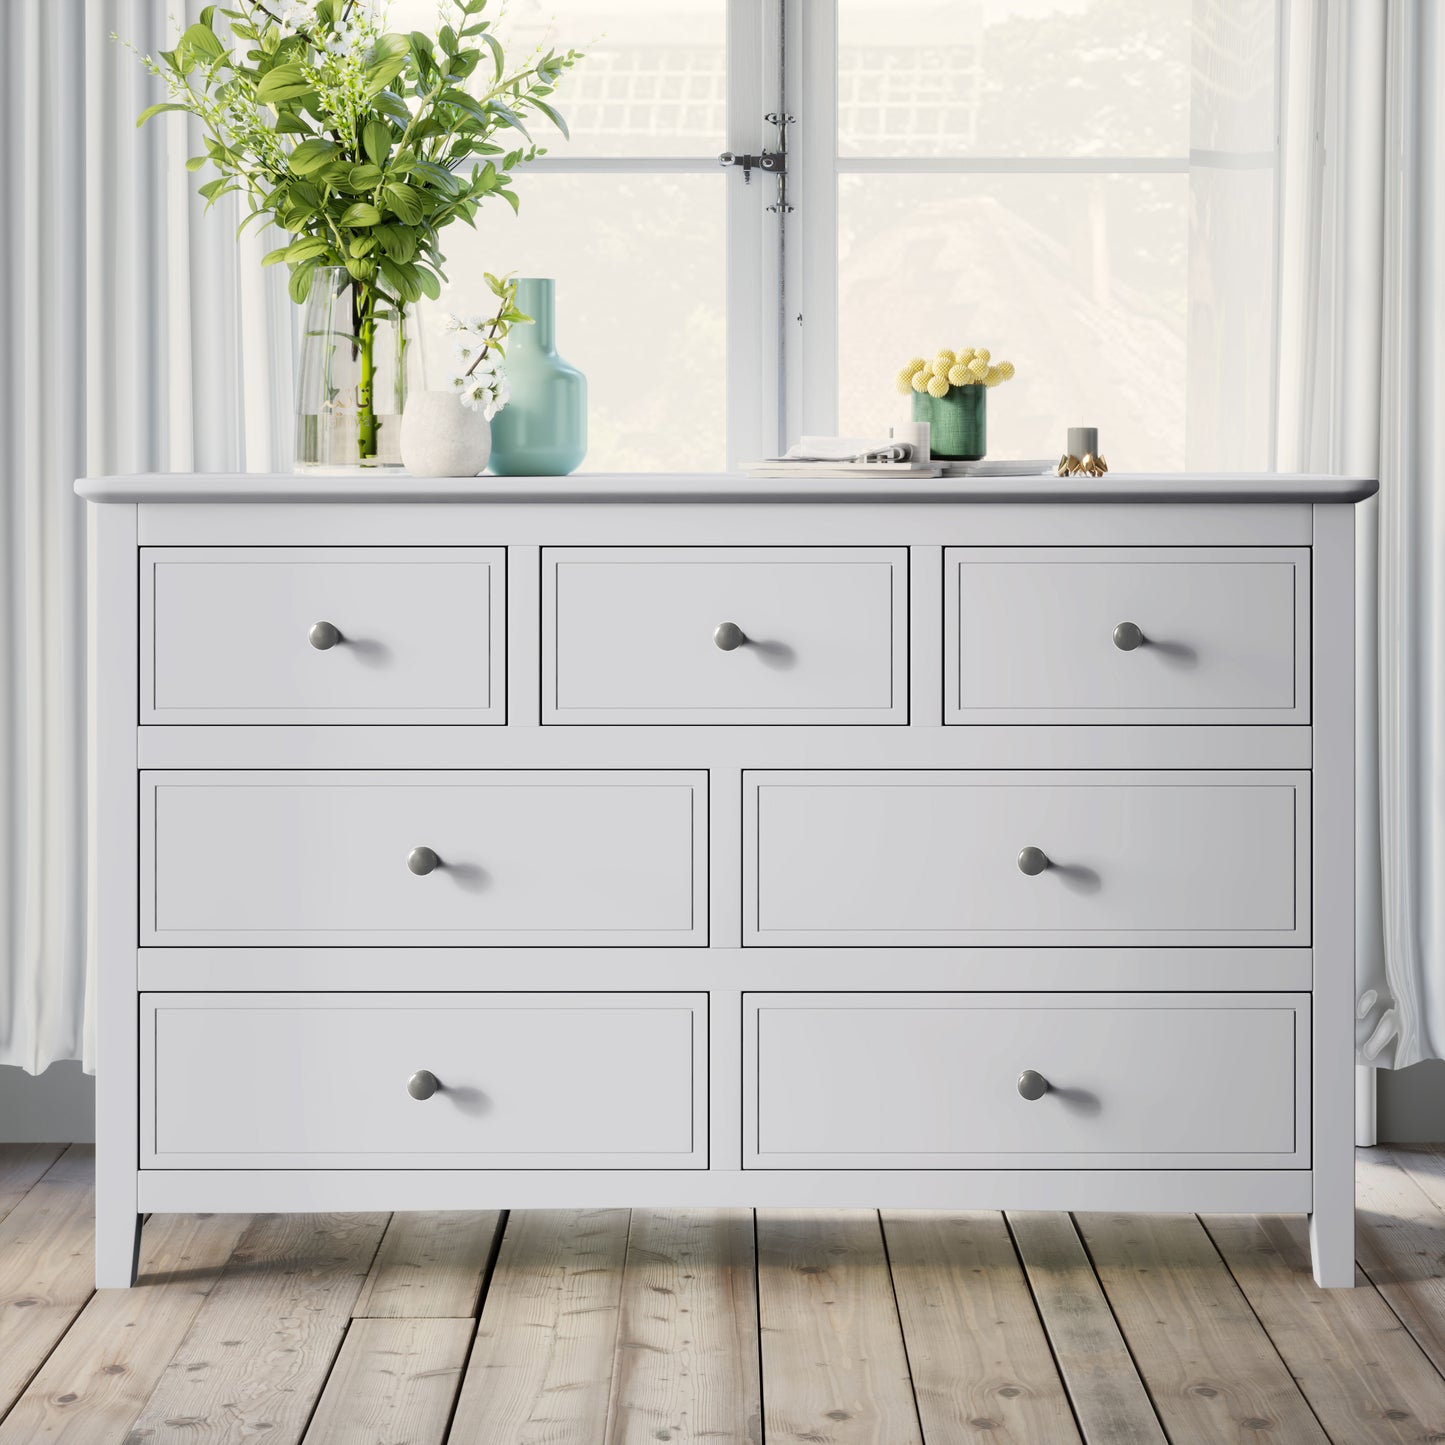 7 Drawers Solid Wood Dresser in White